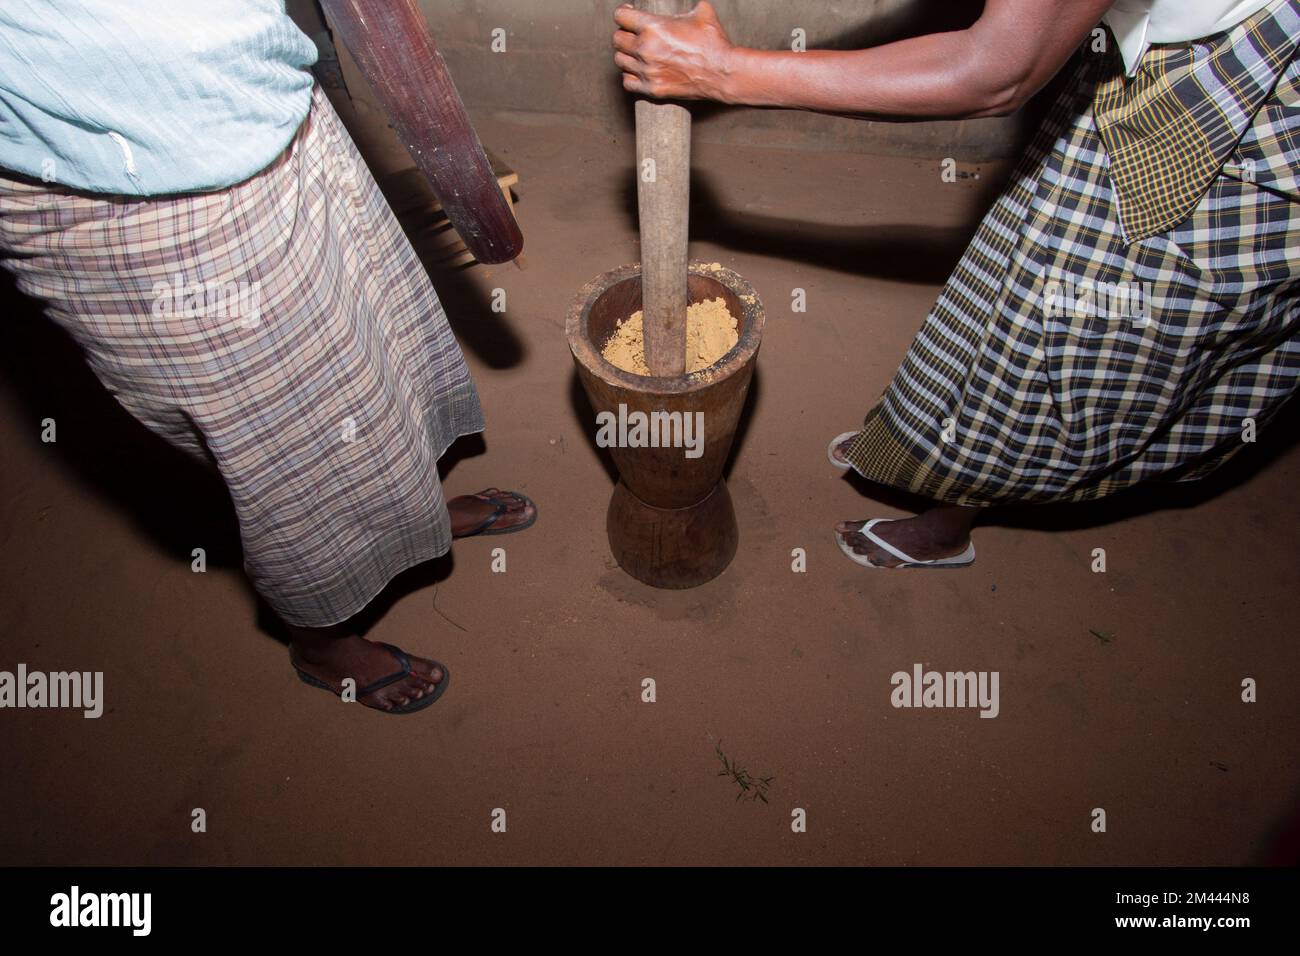 Women pounding peanuts and cassava flour in a large wooden mortar Stock Photo